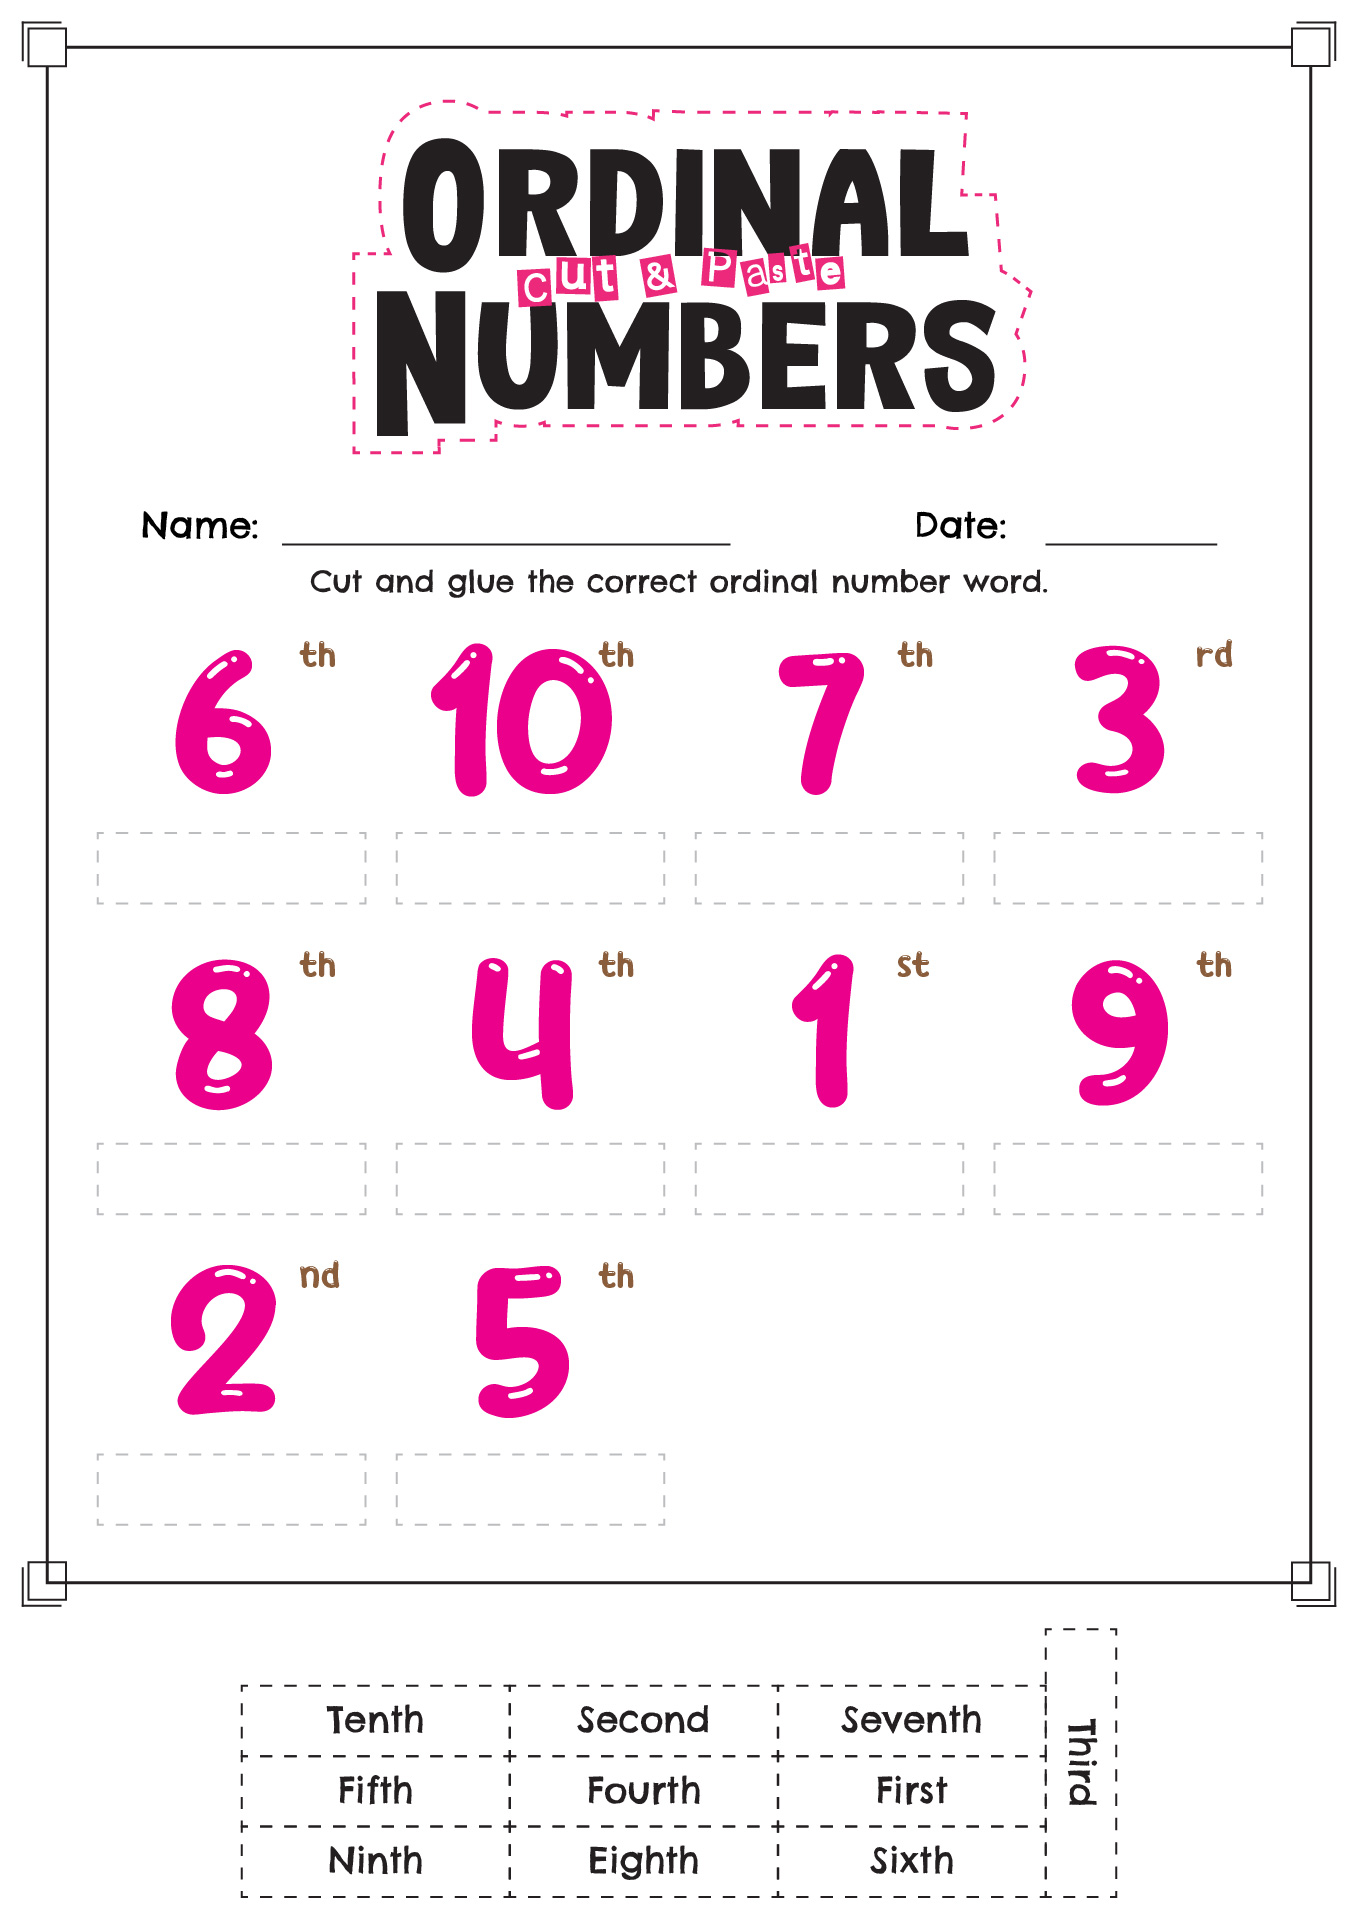 Ordinal Numbers Cut and Paste